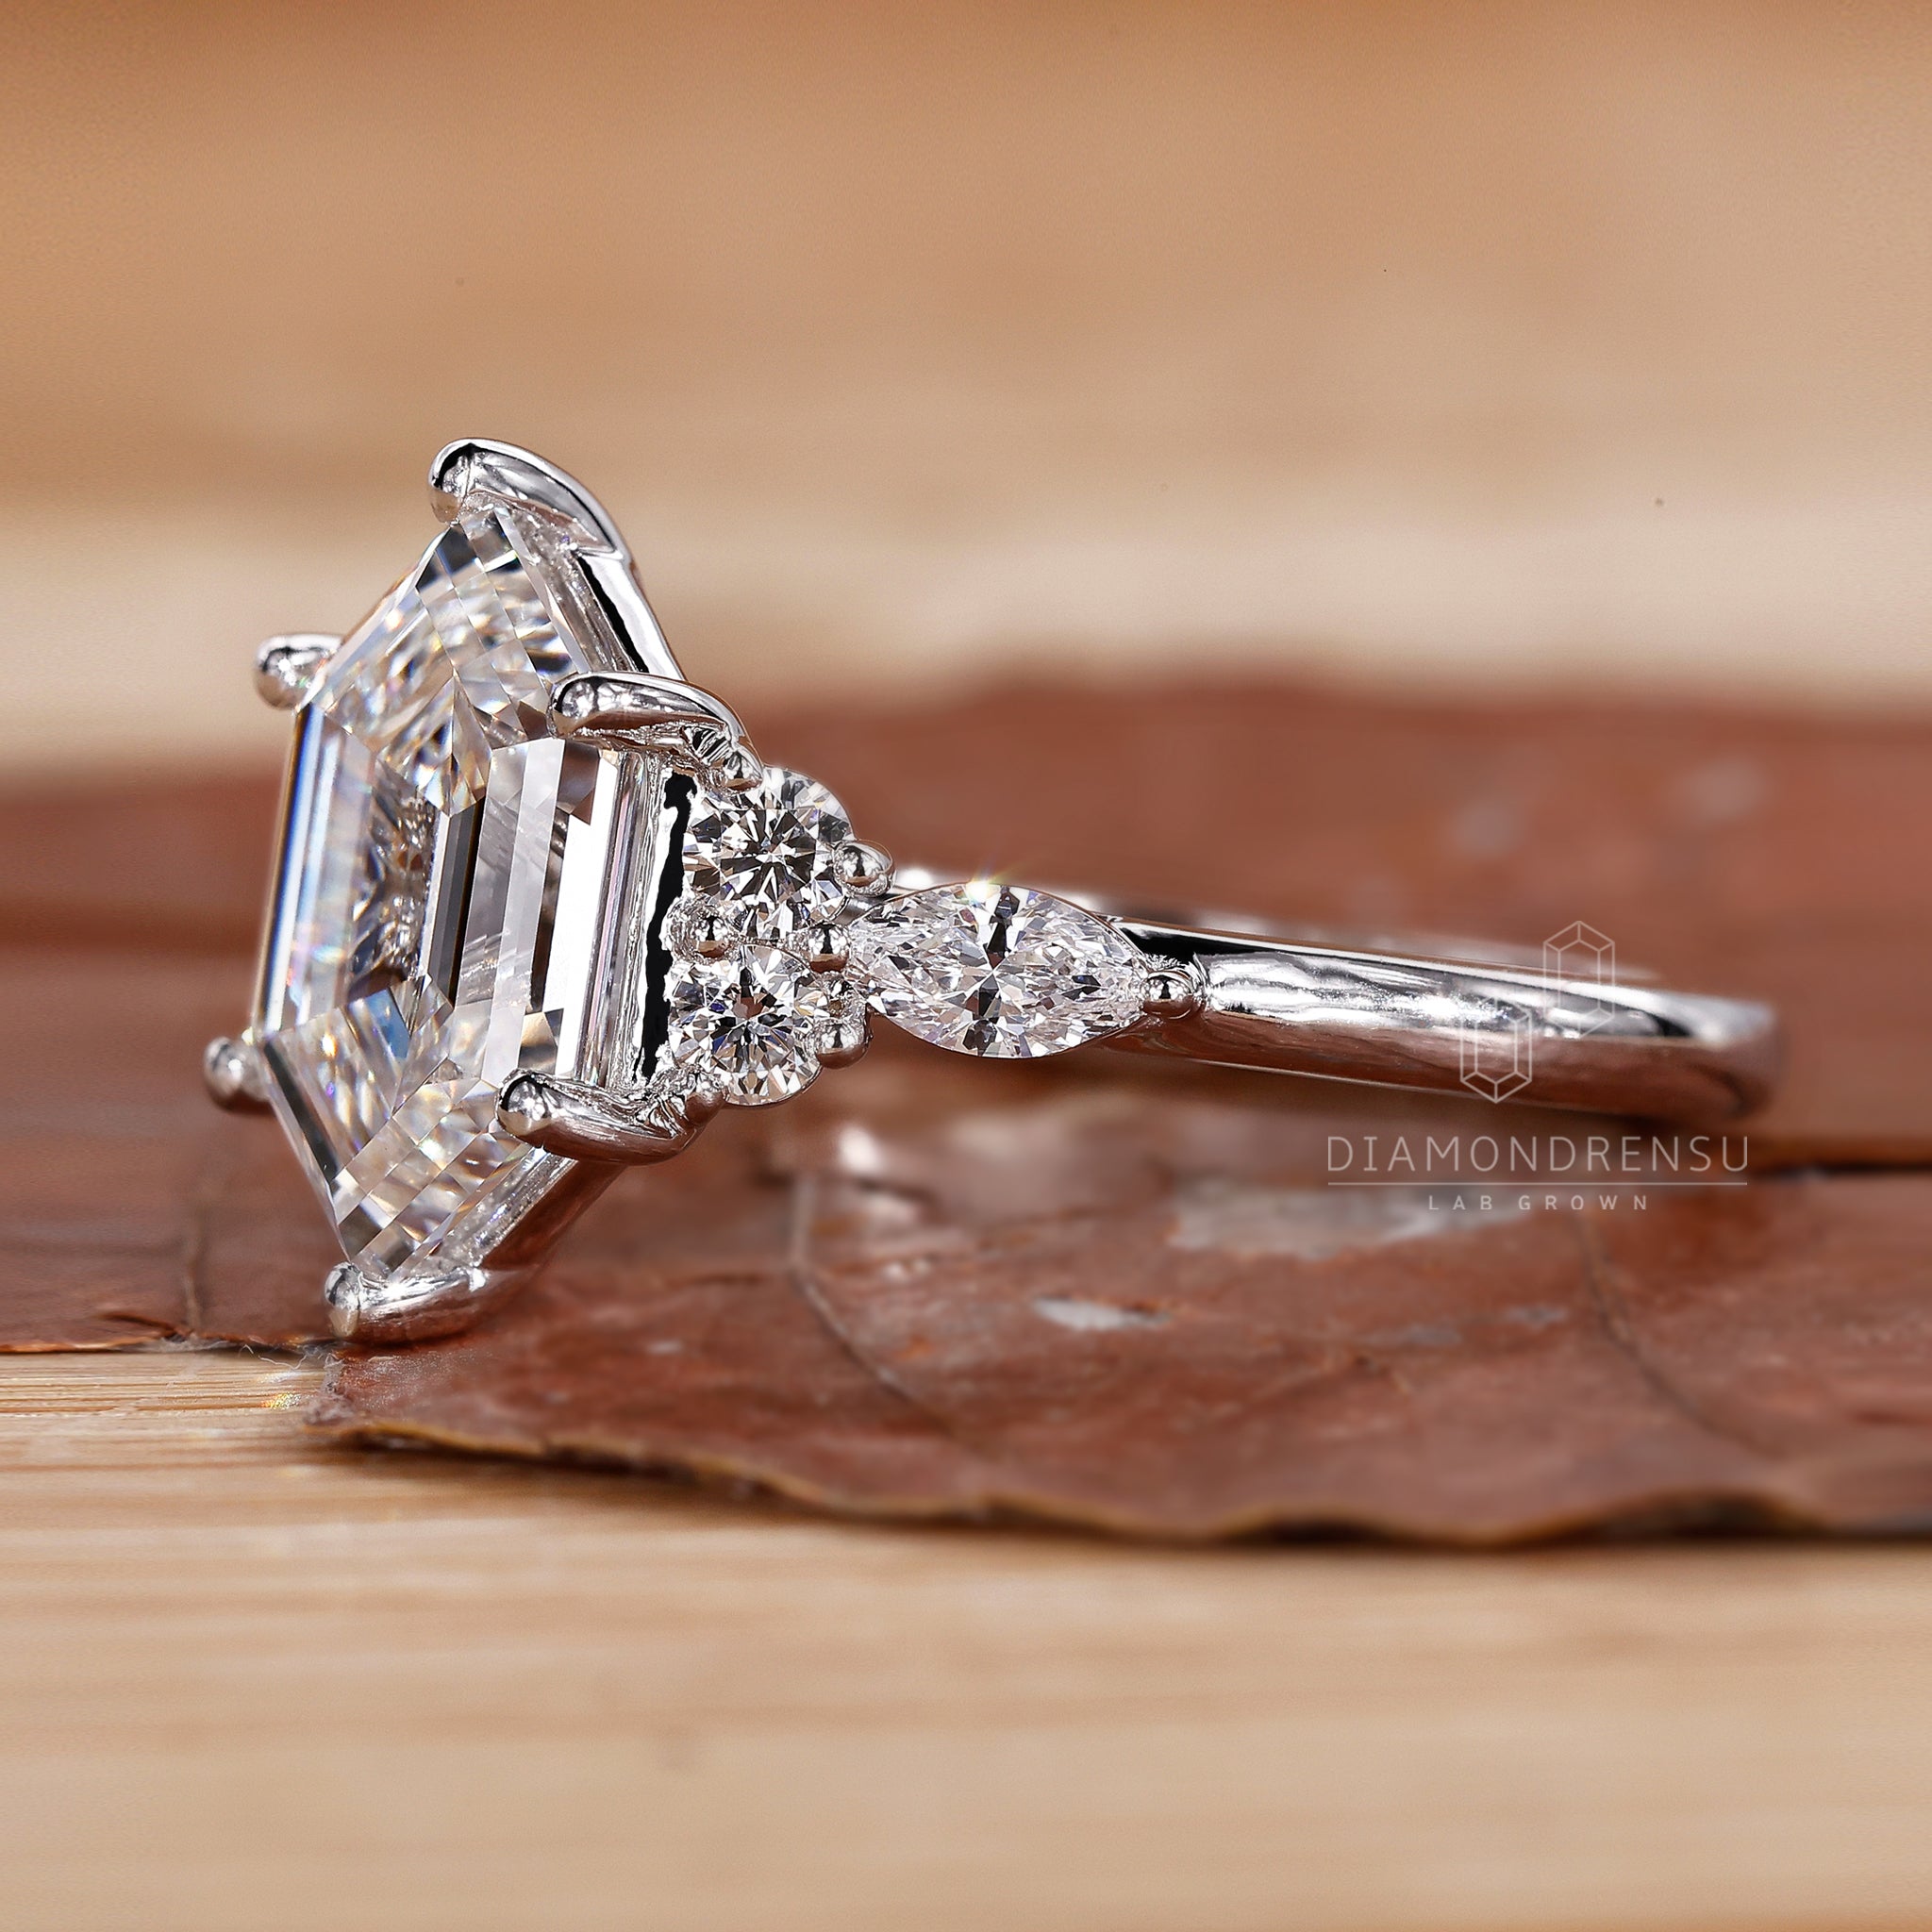 A stunning step-cut hexagon diamond, expertly crafted and nestled within a classic 6-prong engagement ring setting